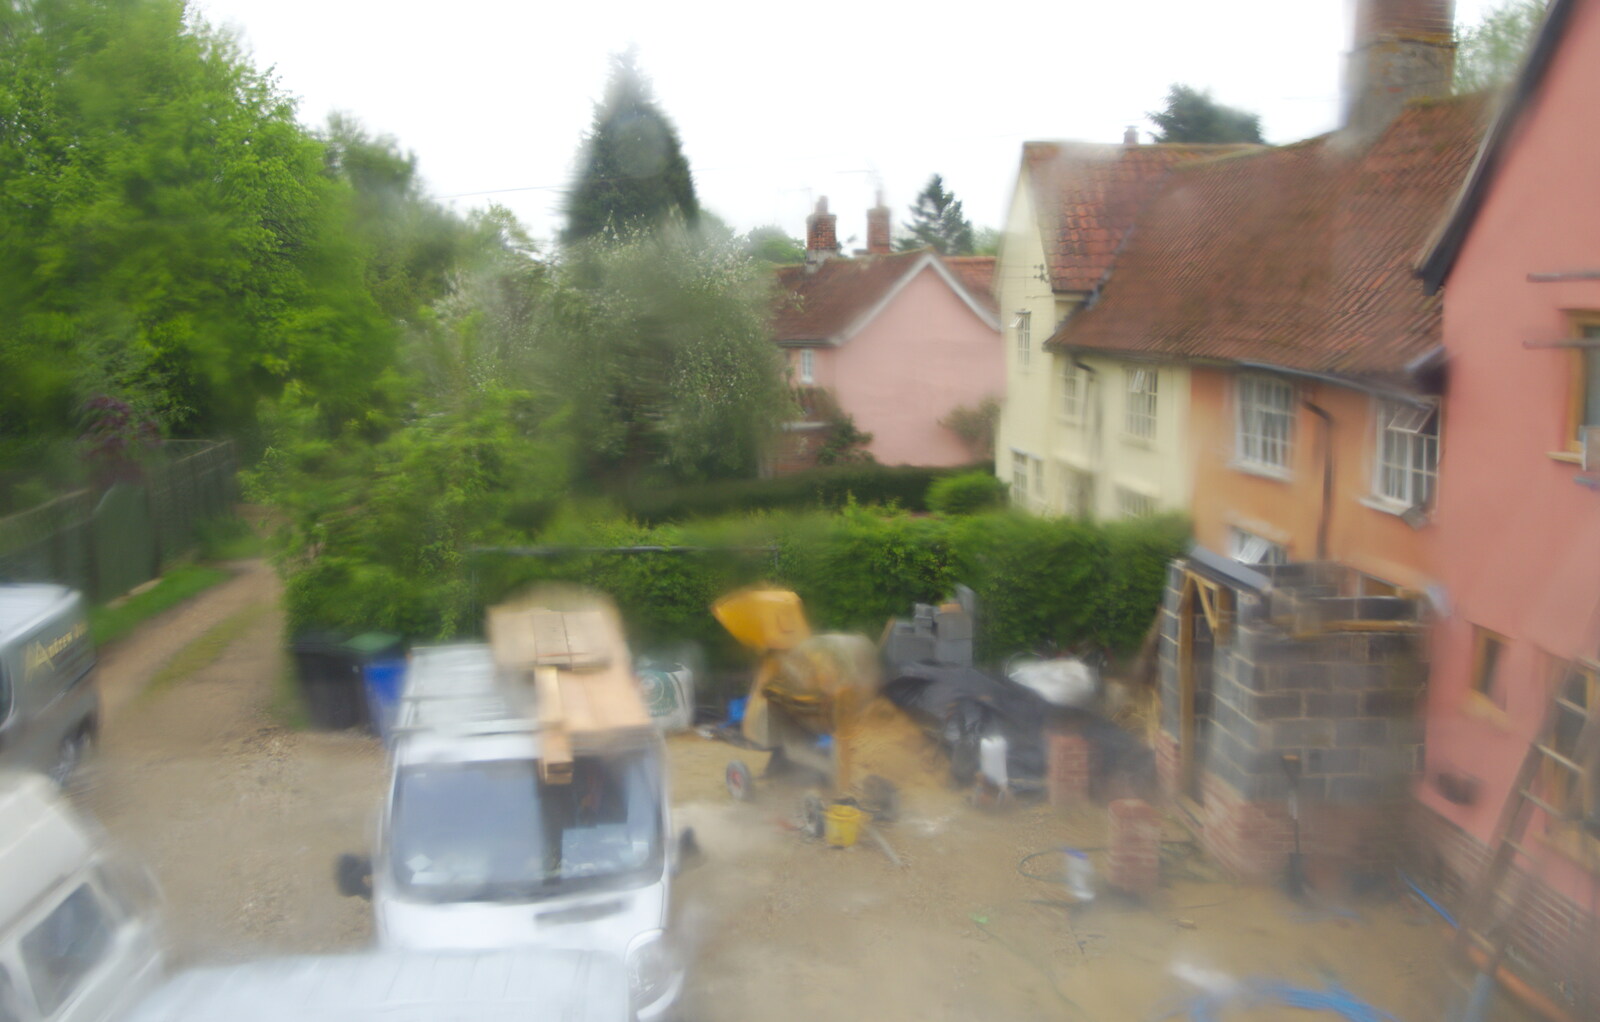 A building site through a rainy Velux window from The BSCC at the Burston Crown, and the Oaksmere Re-opens, Brome, Suffolk - 1st May 2014